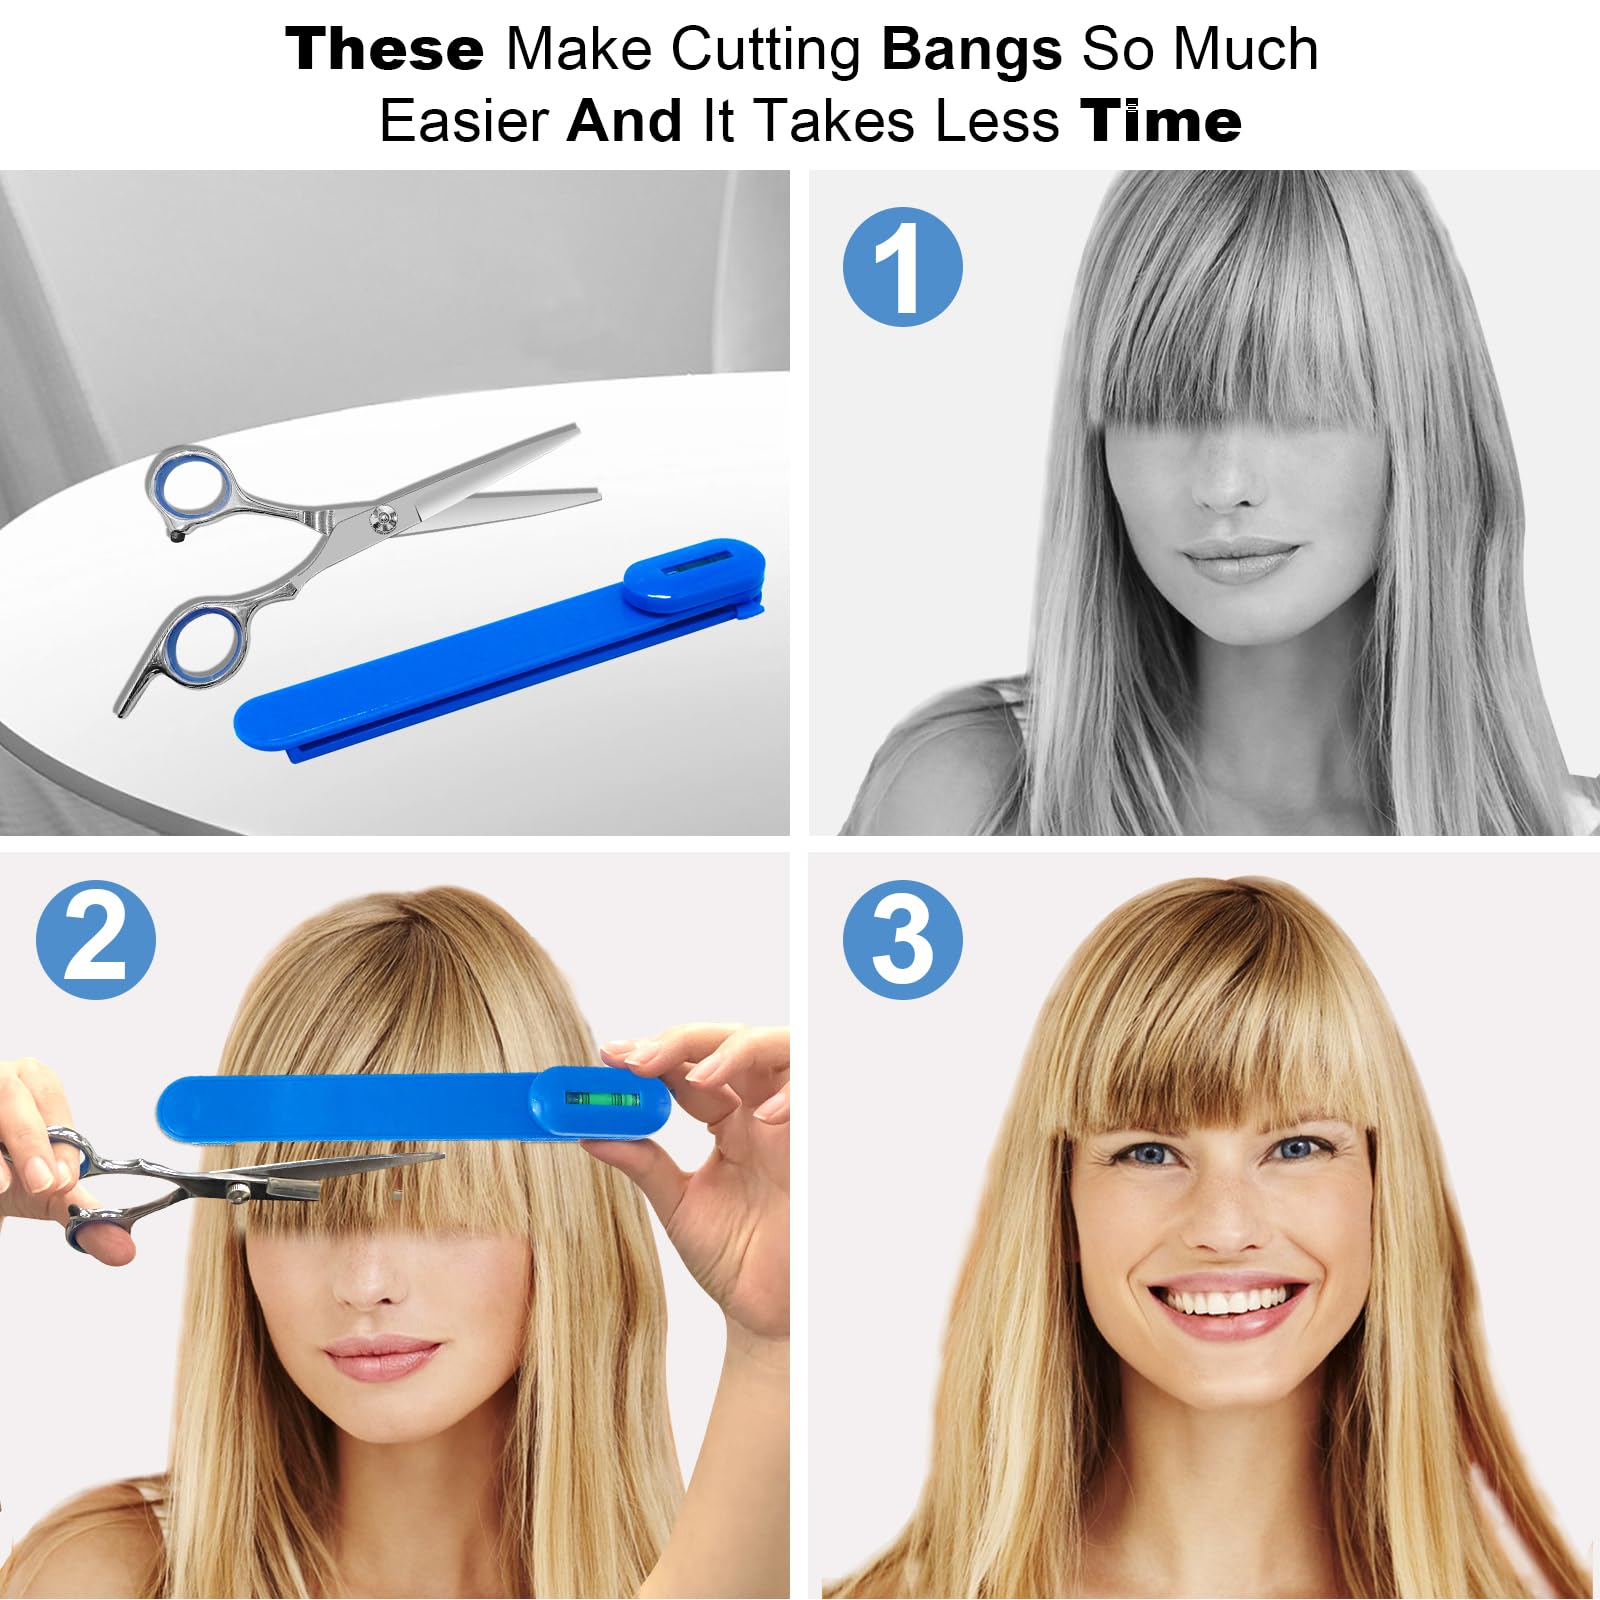 Hair Cutting Tools with Scissors, Hair Cutting Kit Women, DIY Home Hair Cutting Clips for Bangs, Layers, and Split Ends, Hair Cutting Guide (Set of 3) Color Blue